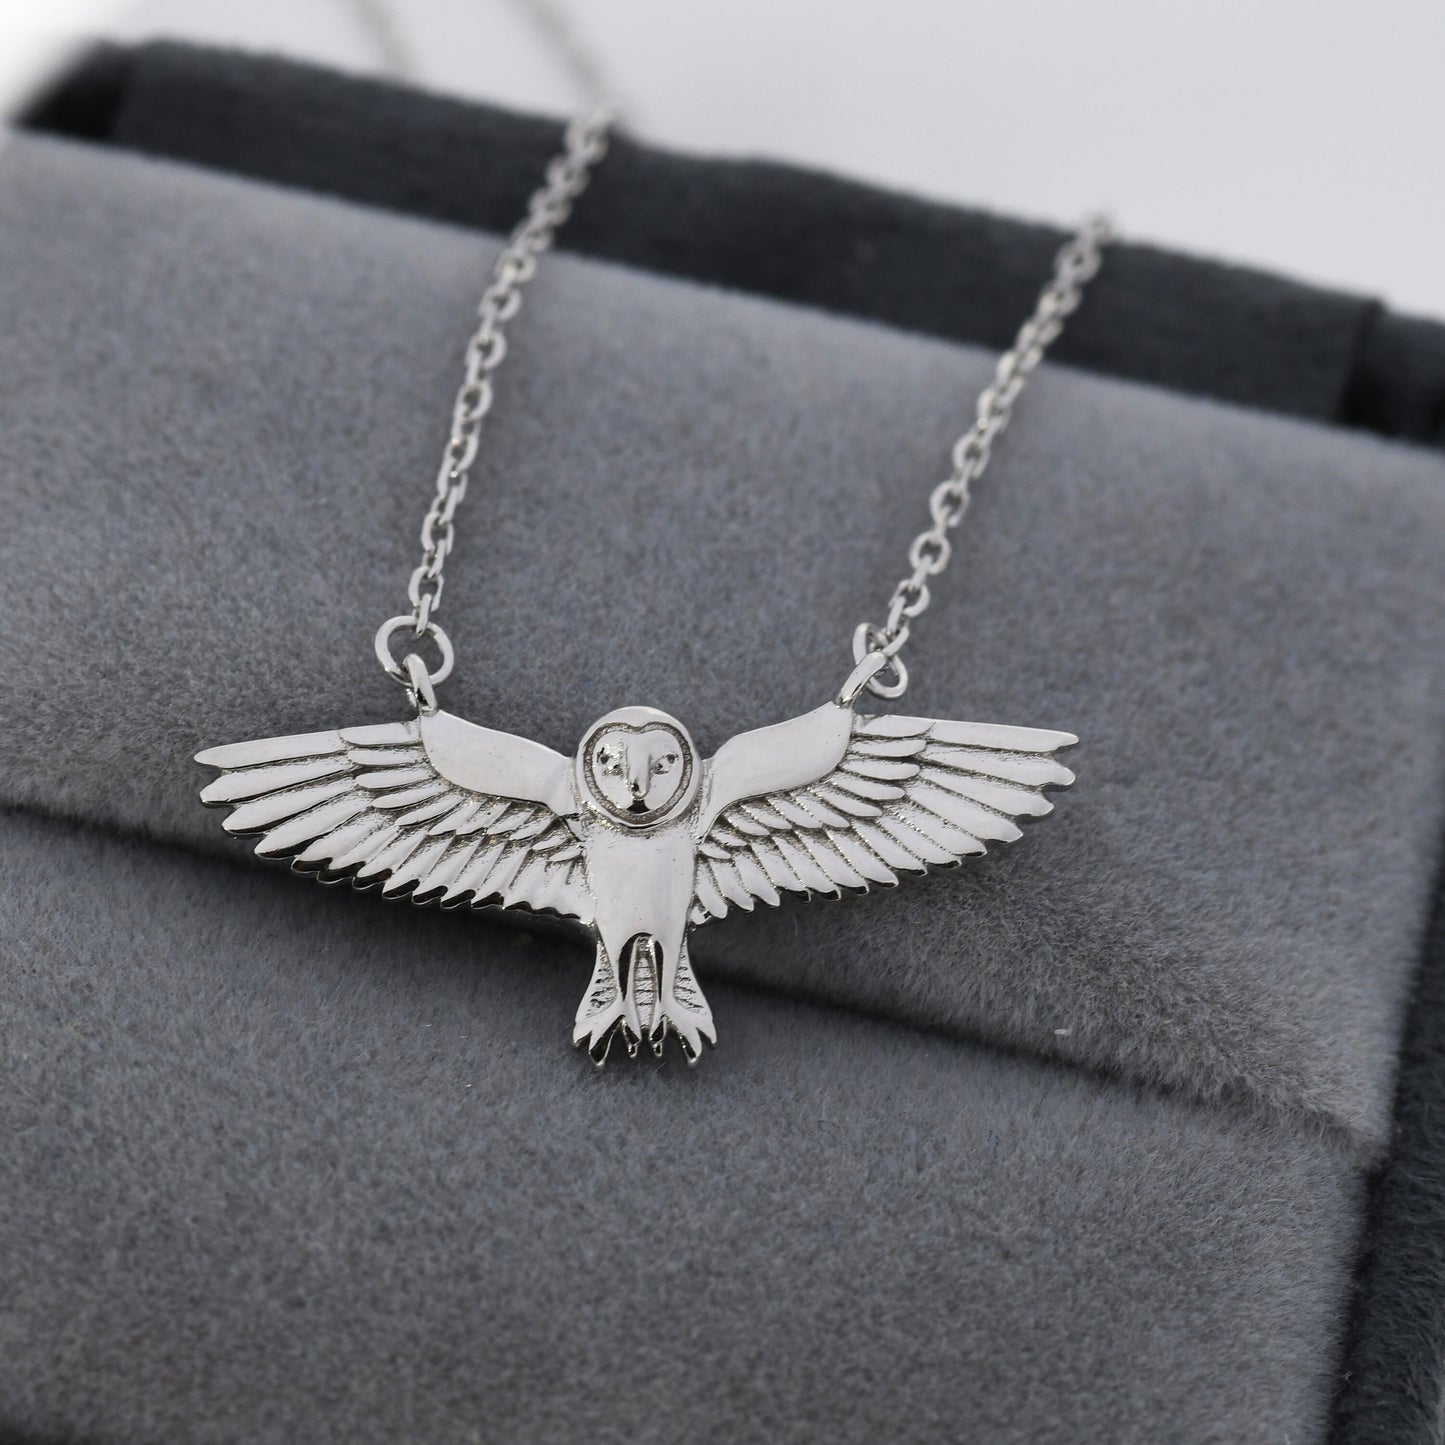 Flying Barn Owl Pendant Necklace in Sterling Silver, Owl Necklace, Silver Barn Owl Necklace, Bird Necklace, Animal Necklace